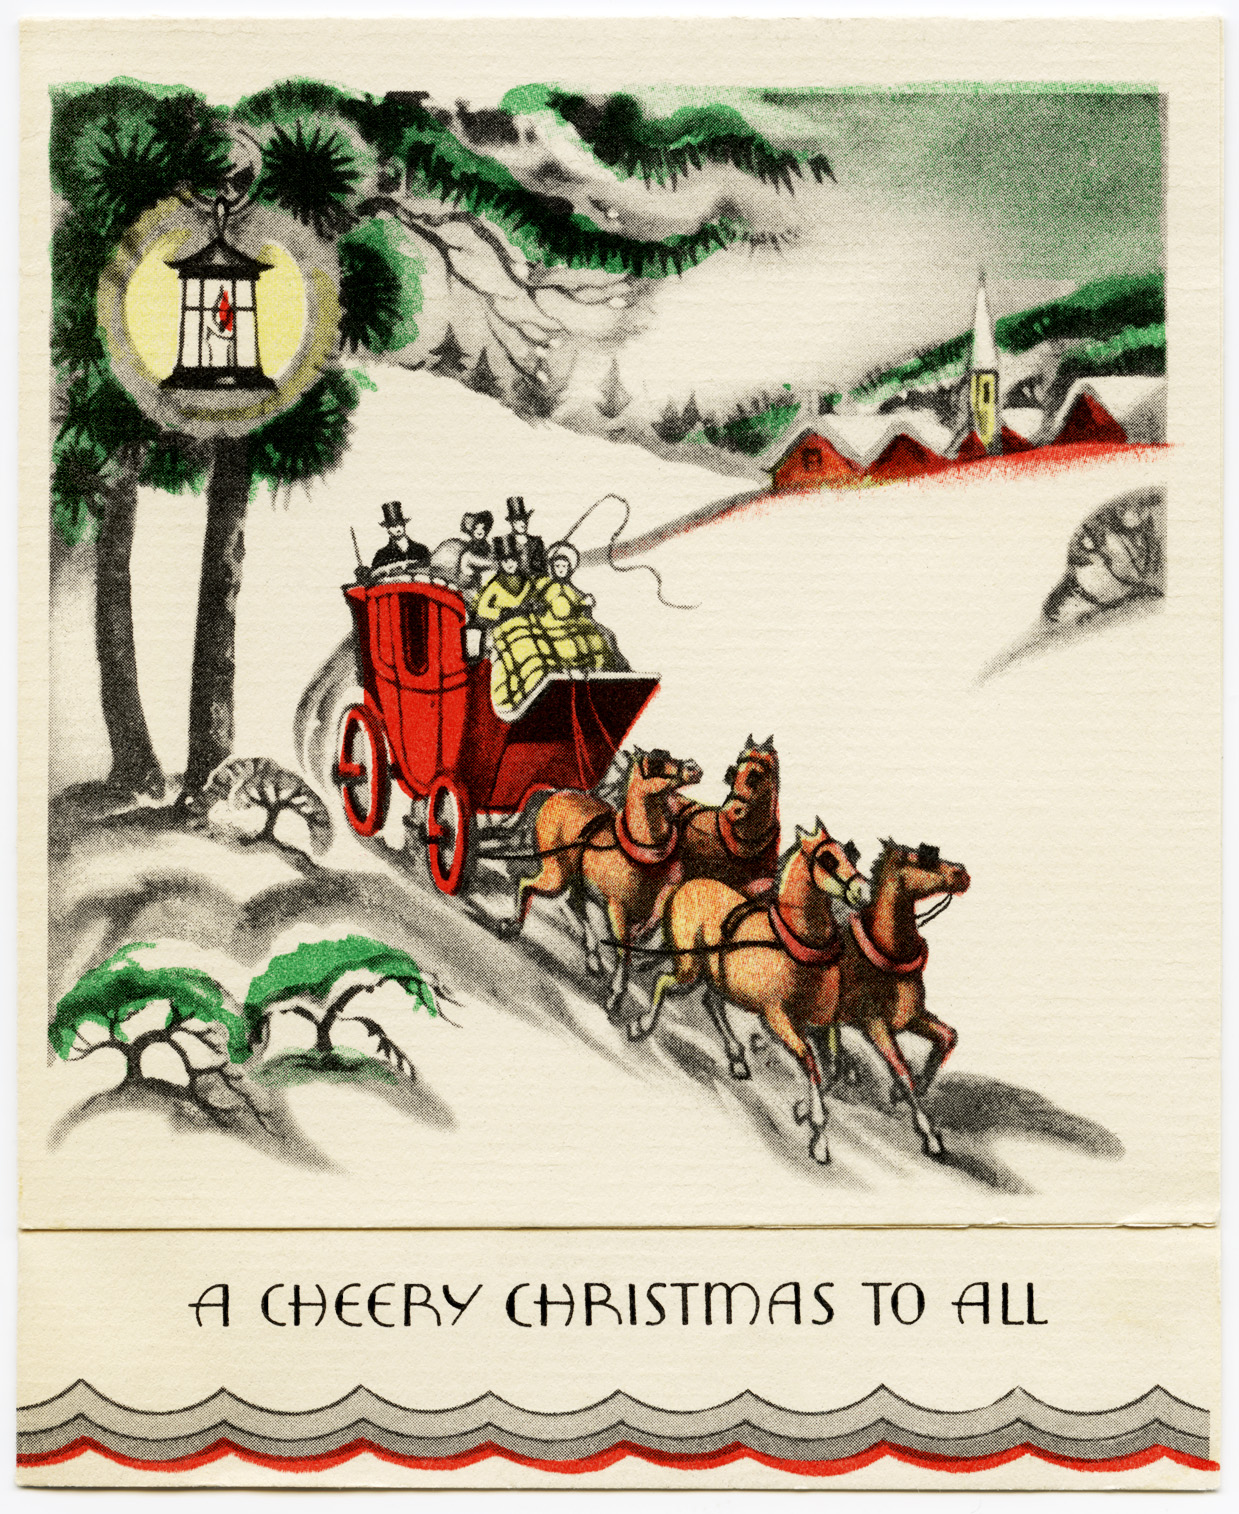 18 Free Graphics Vintage Christmas Card Images